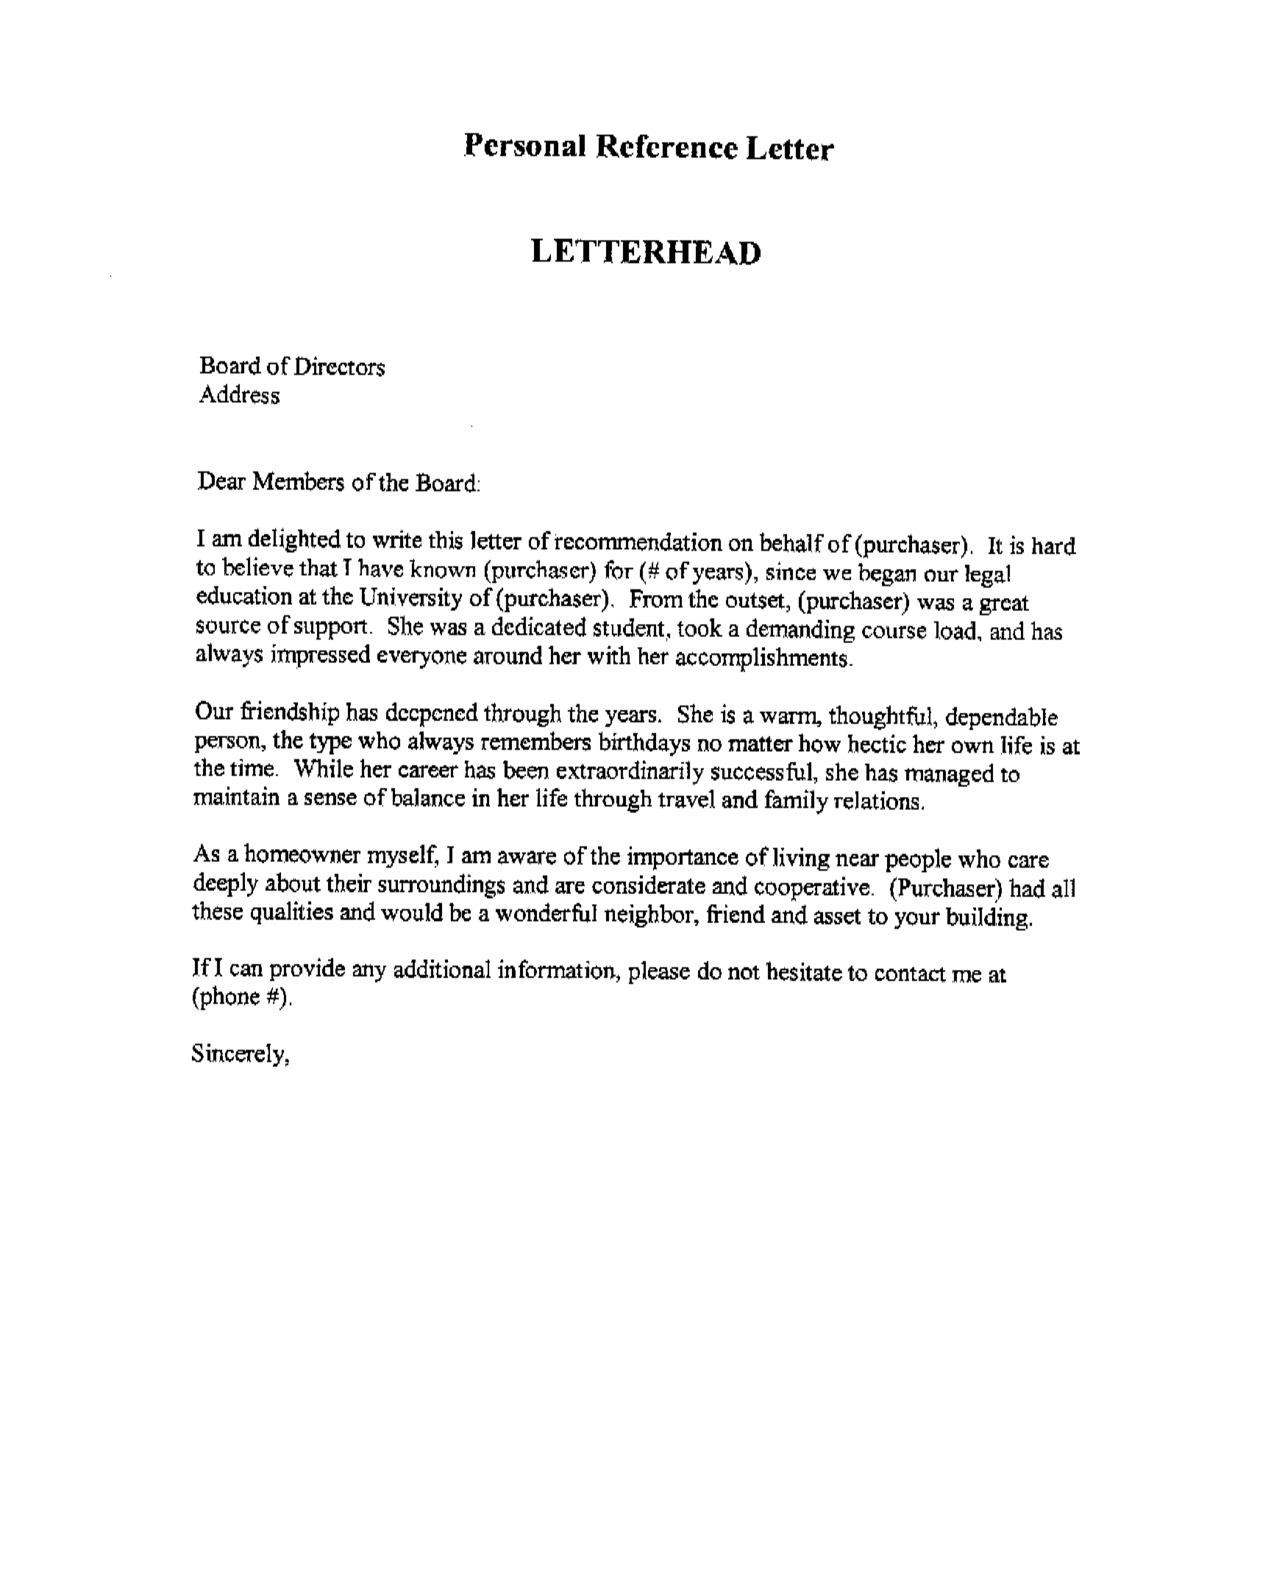 Letter Of Recommendation For College Student From Friend Enom for dimensions 1271 X 1587